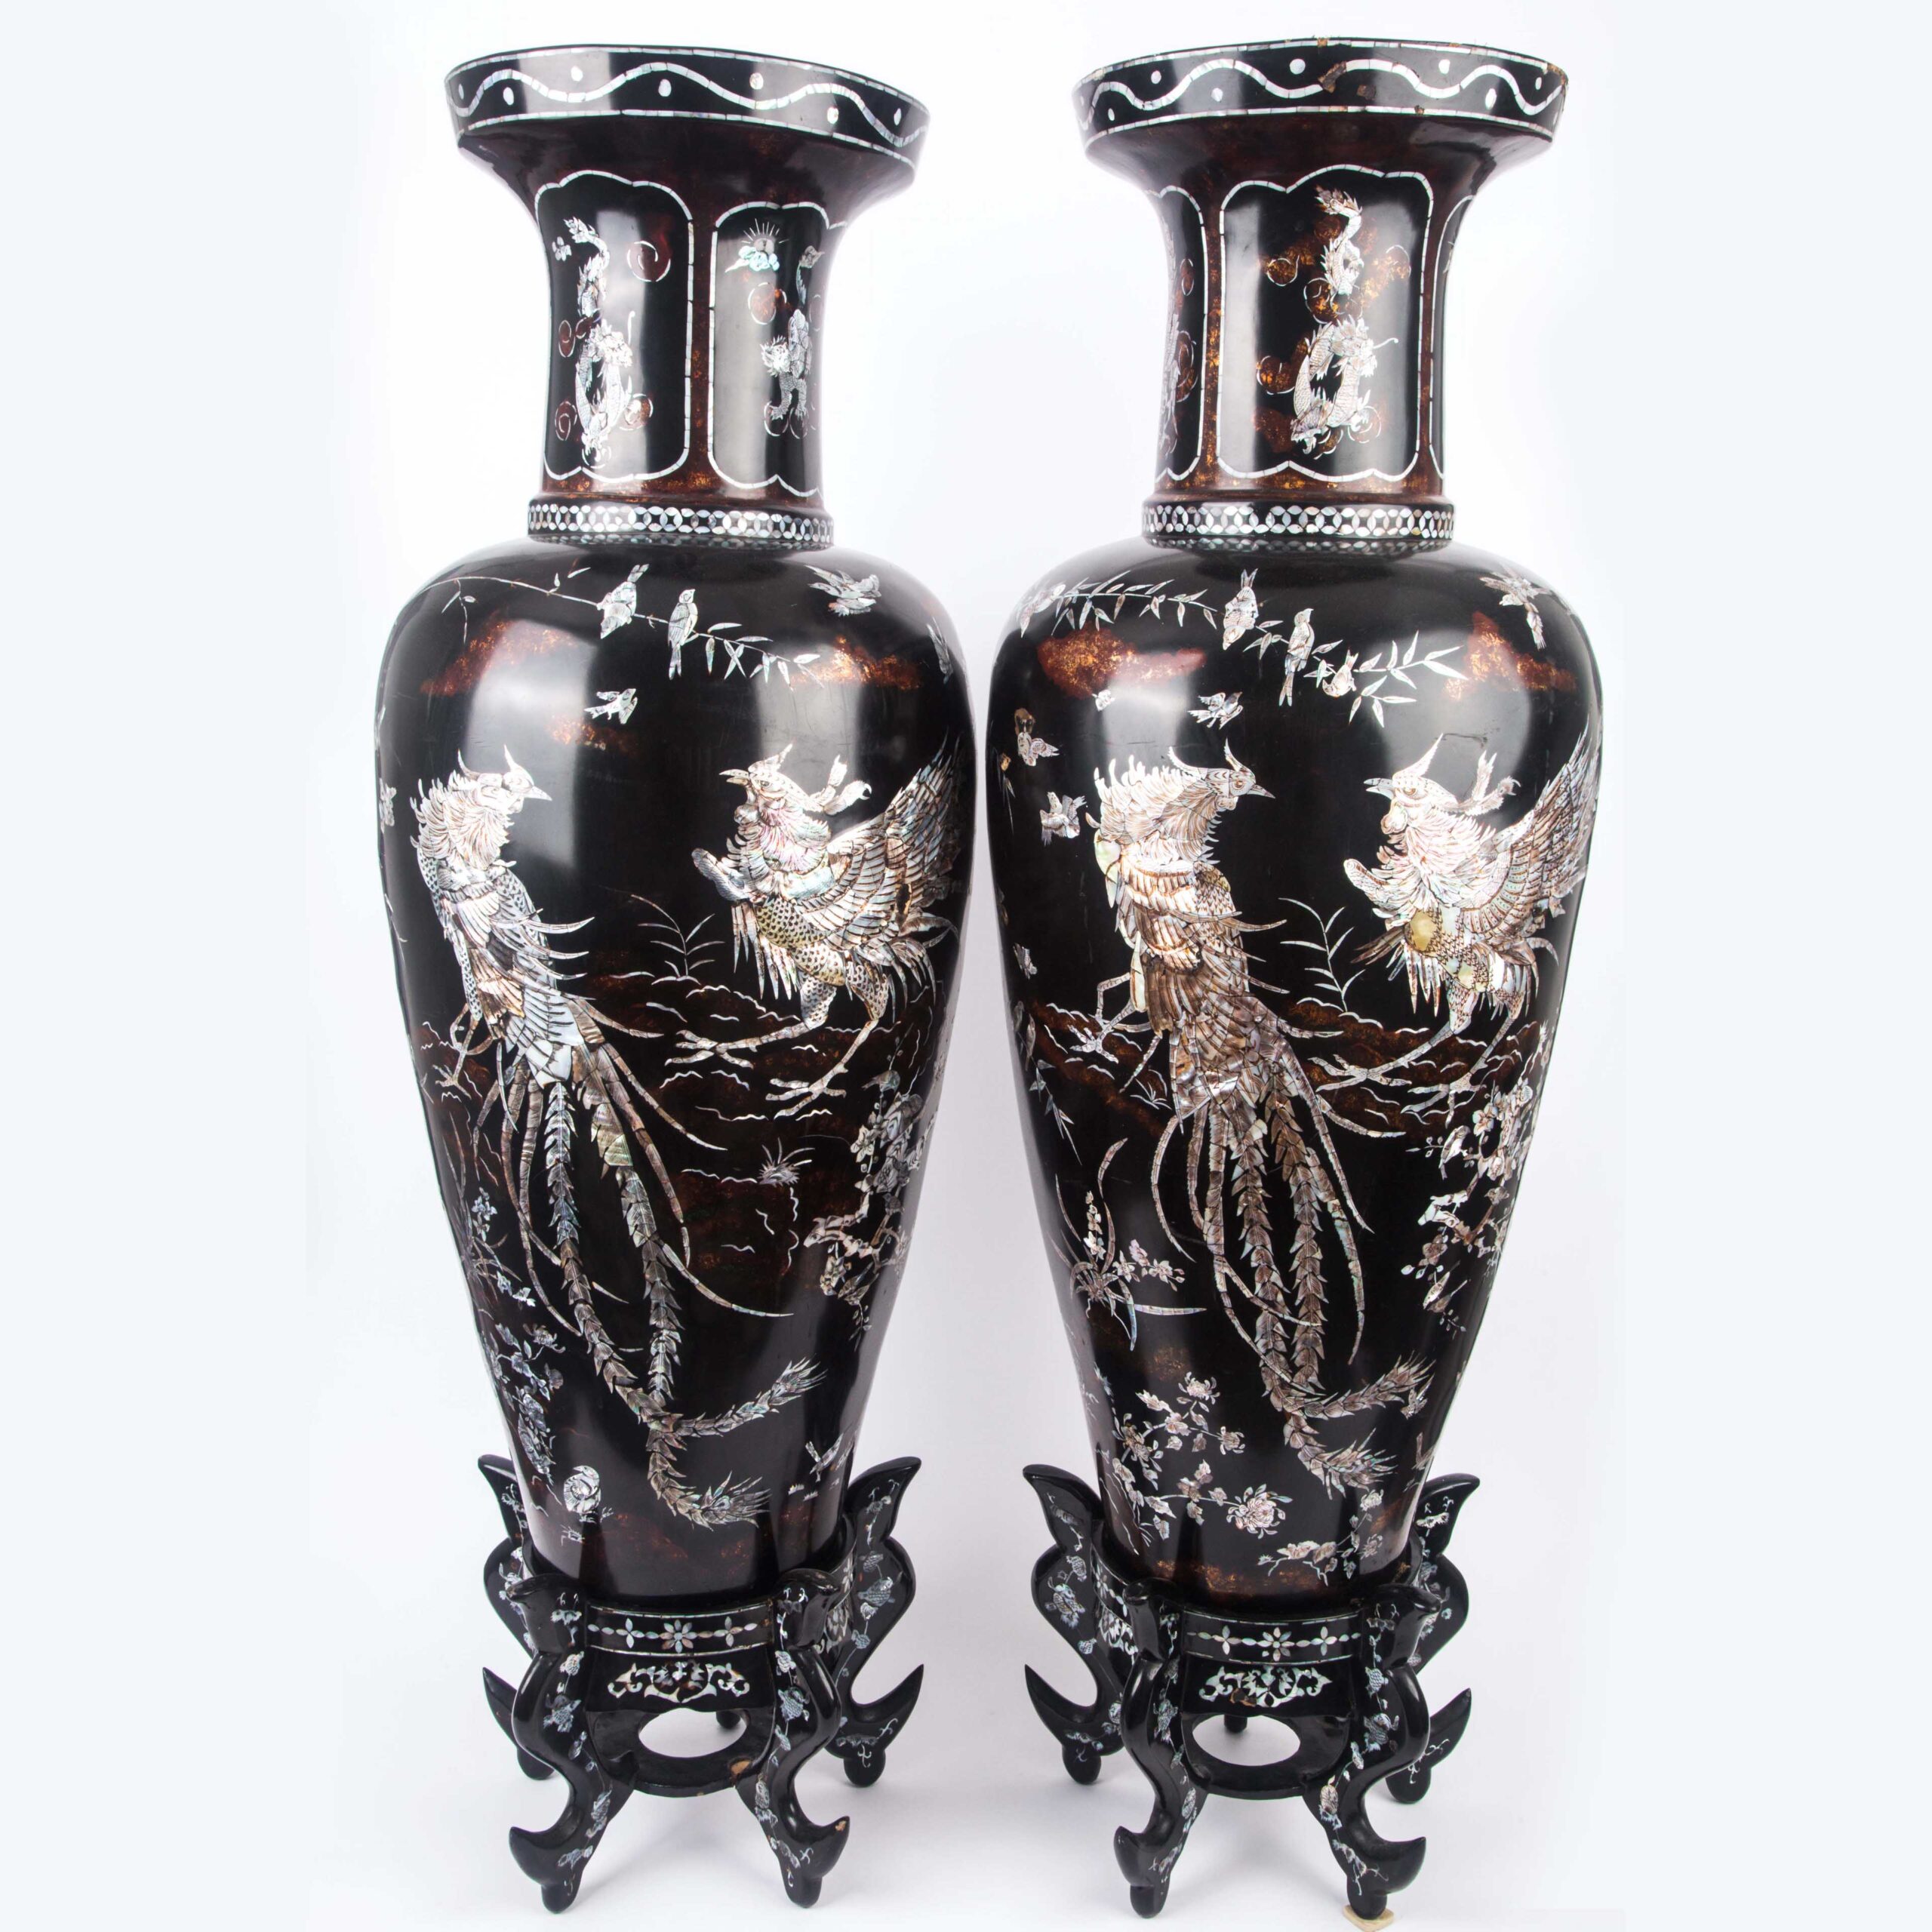 Pair of big vases inlaid mother-of-pearl, 19th century嵌螺钿花鸟赏 